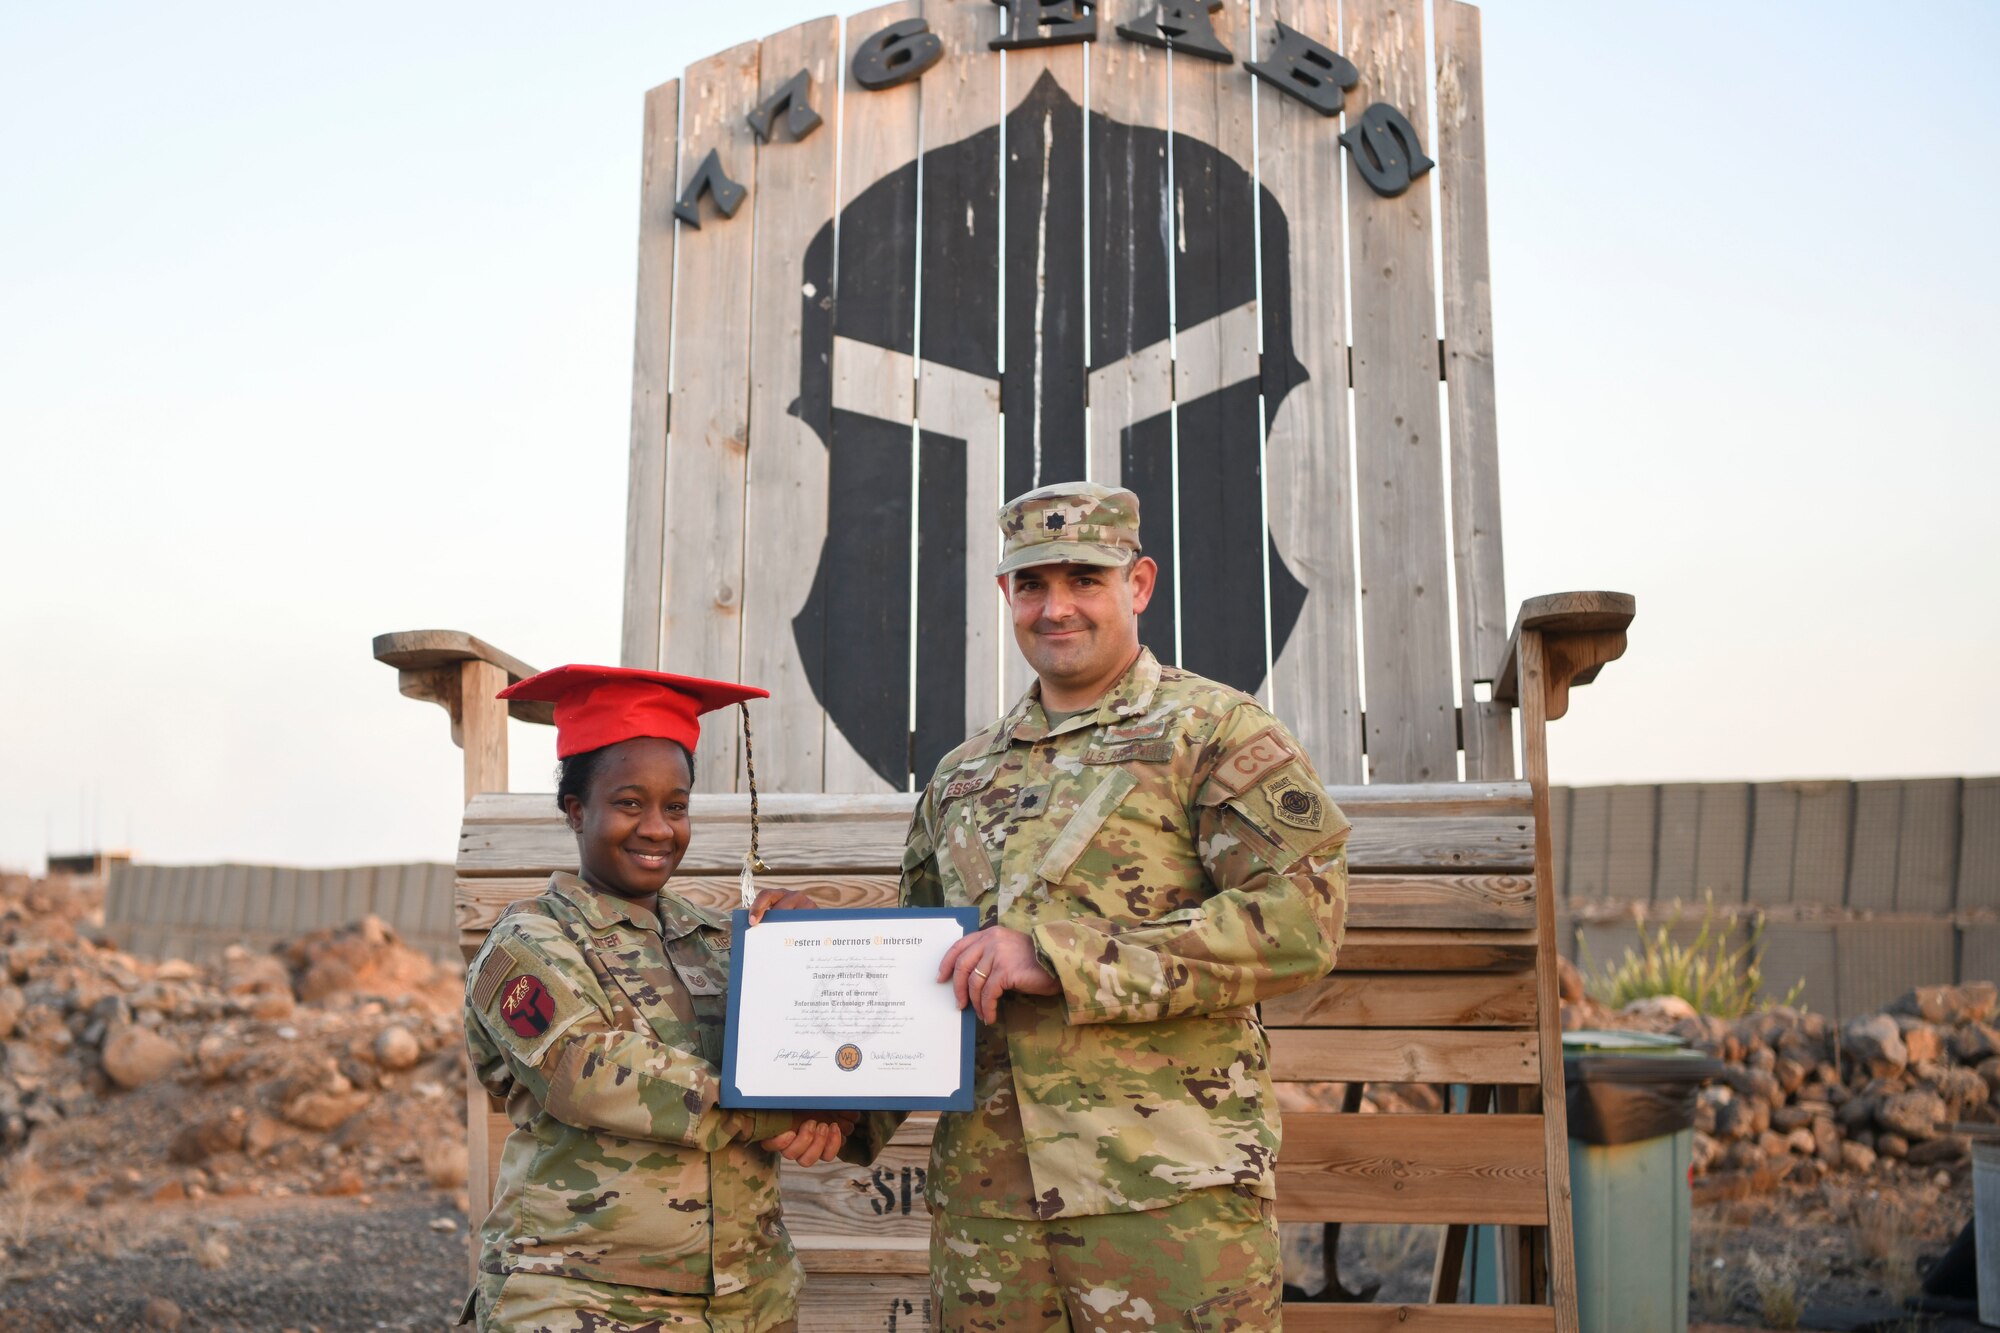 U.S. Air Force Lt. Col. Jonathan Esses, 776th Expeditionary Air Base Squadron  installation commander, right, and U.S. Air Force Tech. Sgt. Audrey Hunter, 776th EABS commander’s executive, left, pose for a photo at Chabelley Airfield, Djibouti, Feb. 6, 2022. With limited resources and the many constraints of life in East Africa, Hunter graduated with a Master of Science in Information Technology Management. The ability of service members to develop and maintain social relationships that they can draw on to manage stressors and have successful personal and professional lives is a key component of resiliency. (U.S. Air Force photo by Senior Airman Ericka A. Woolever)